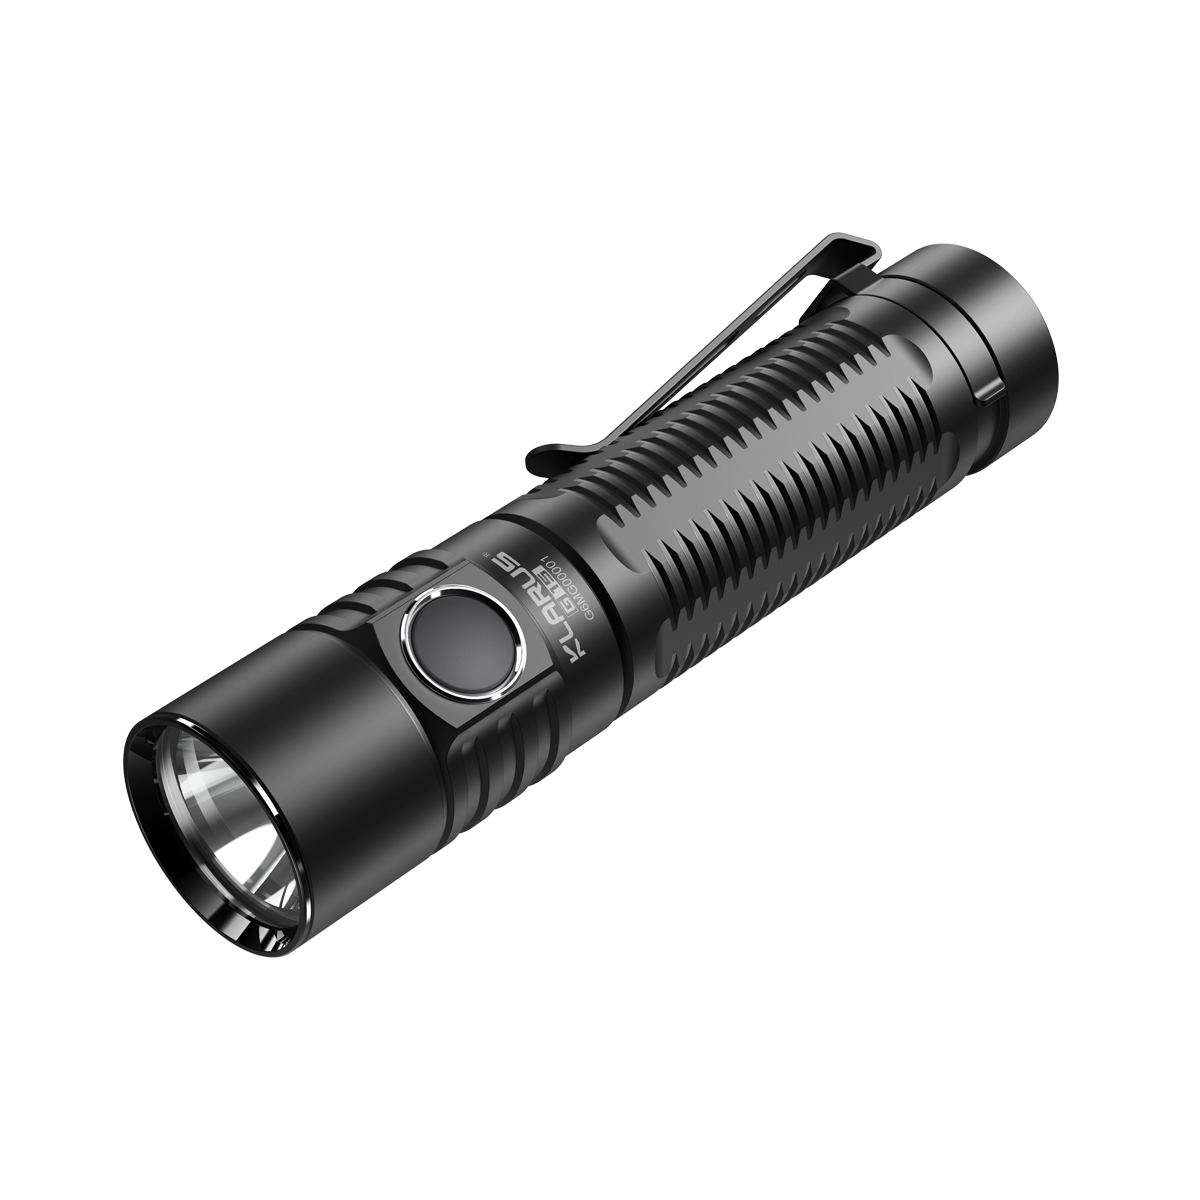 

KLARUS G15 XHP70.2 4000LM Ultra-bright Long Running Tactical Flashlight with 5000mAh Powerful 21700 Battery USB Recharge